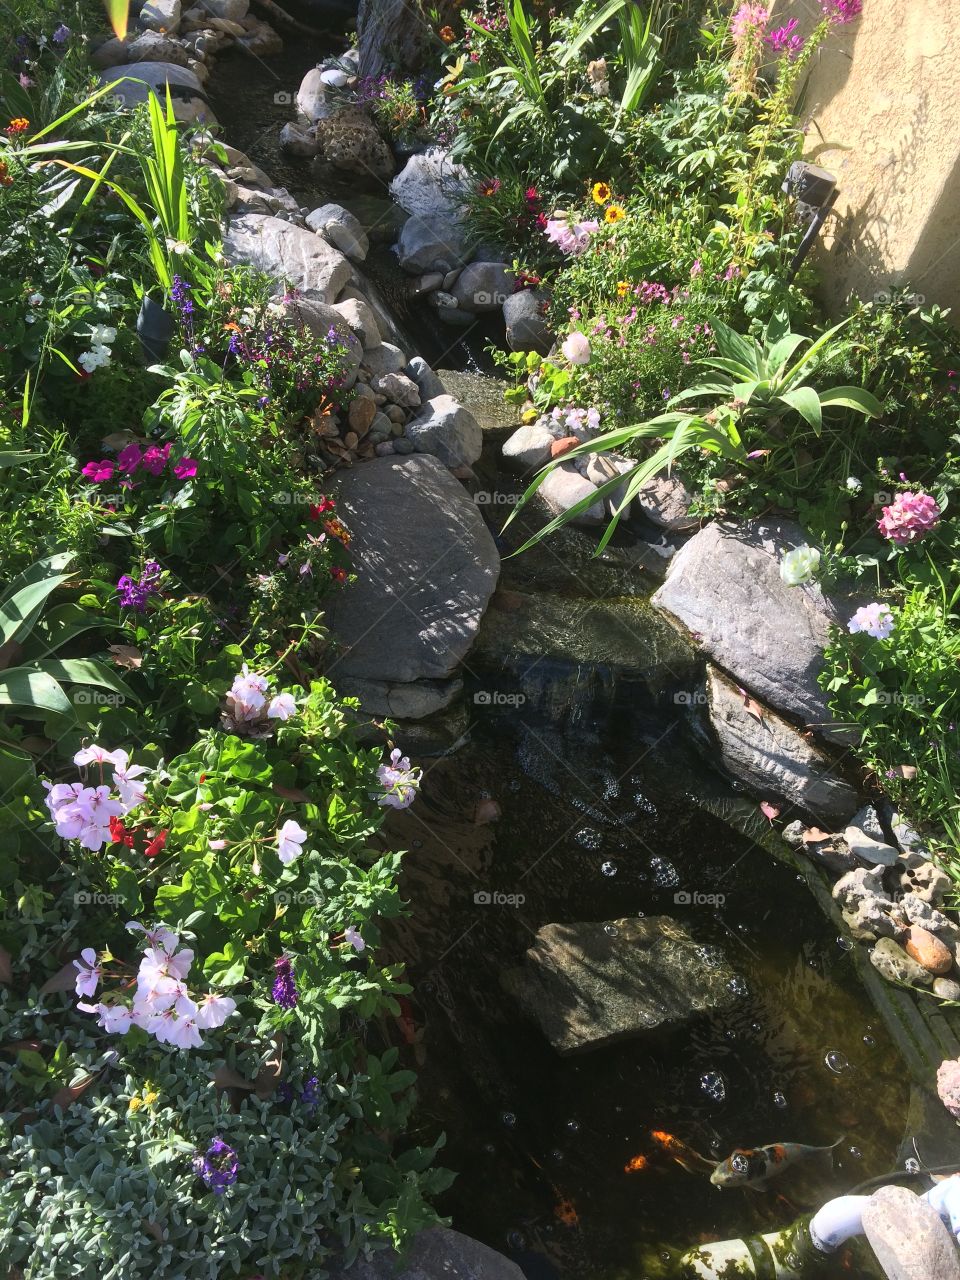 A clear stream flows between rocks amidst a tranquil, colorful flower garden.